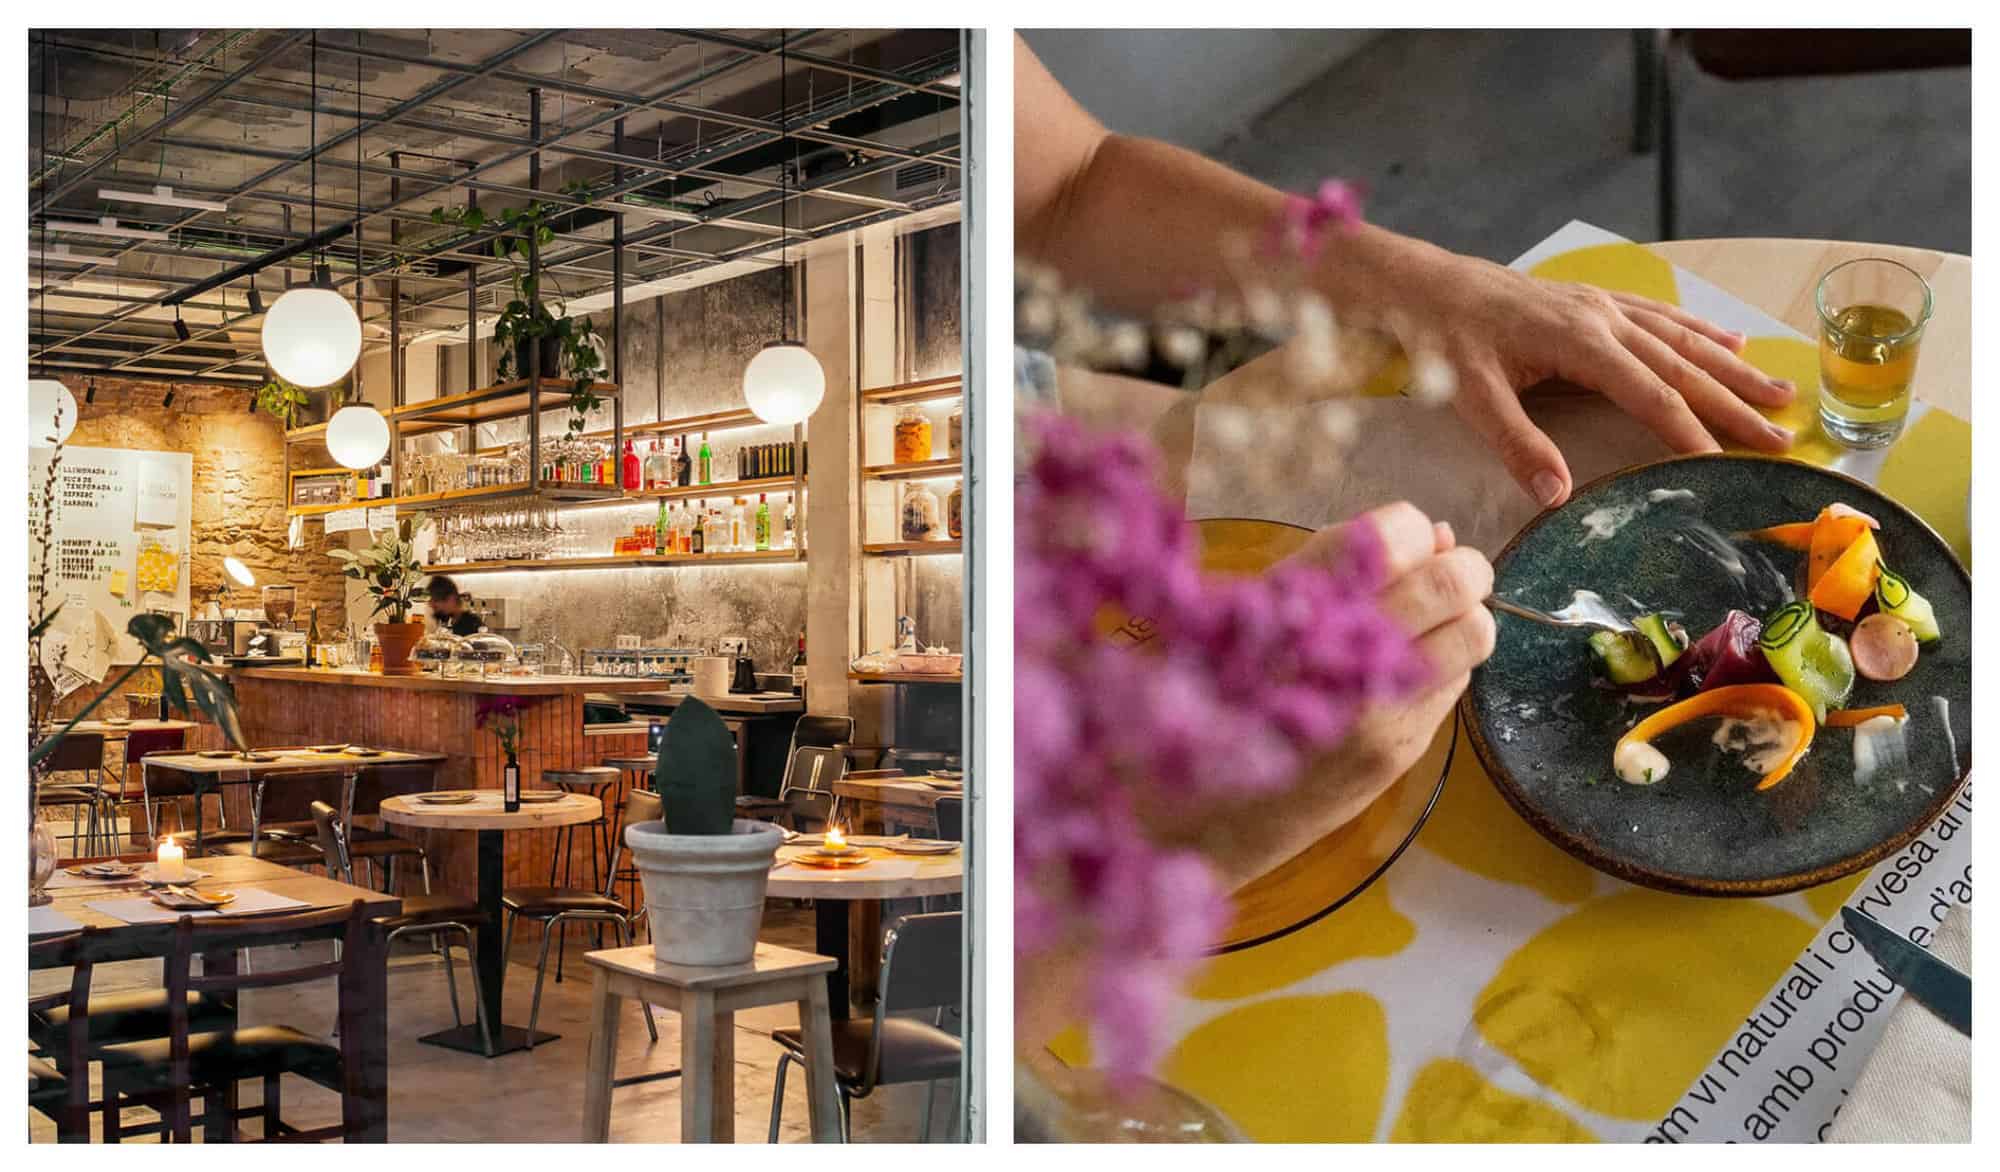 Left: An industrial chic interior of a restaurant with white marbled tables. Right: A customer eats a plate of appetizer with colorful vegetables and a shot of yellow liquor.